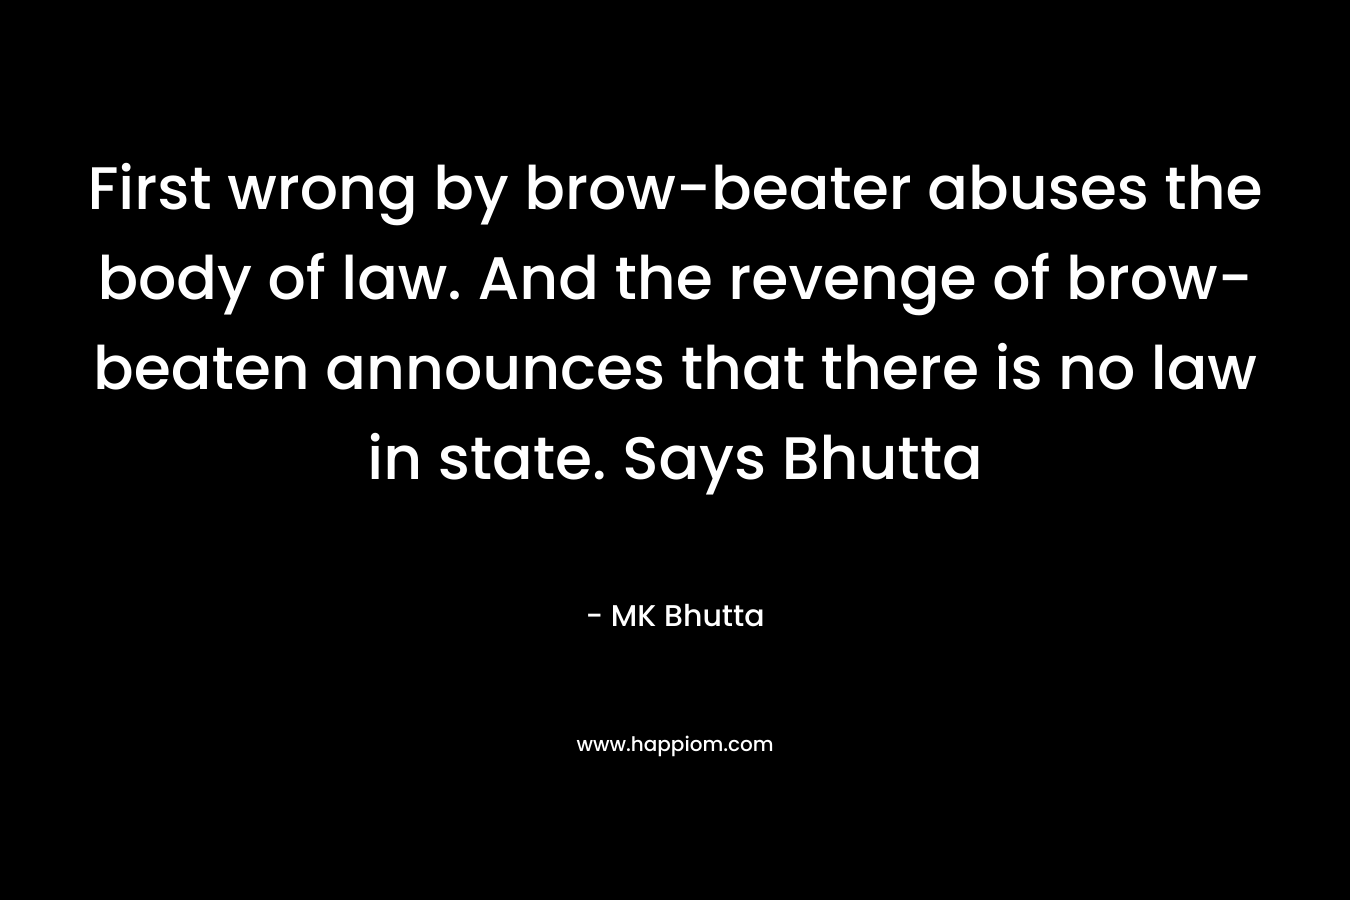 First wrong by brow-beater abuses the body of law. And the revenge of brow-beaten announces that there is no law in state. Says Bhutta